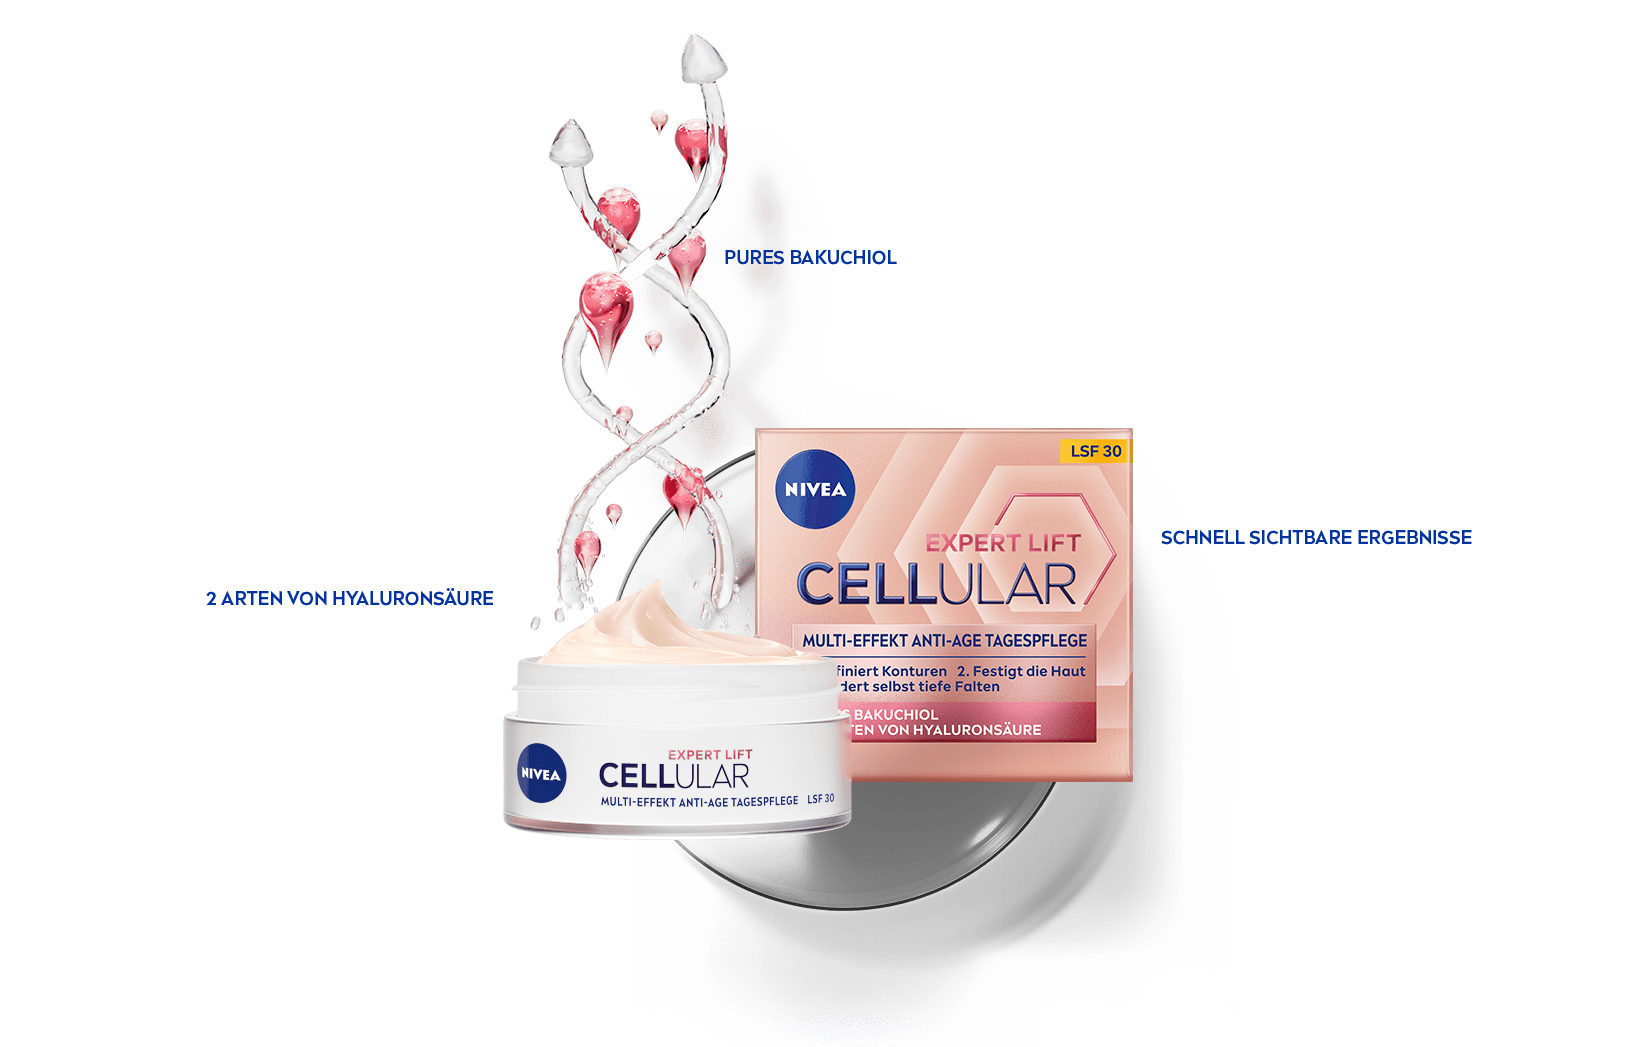 CELLULAR Expert Lift Day Care with Bakuchiol